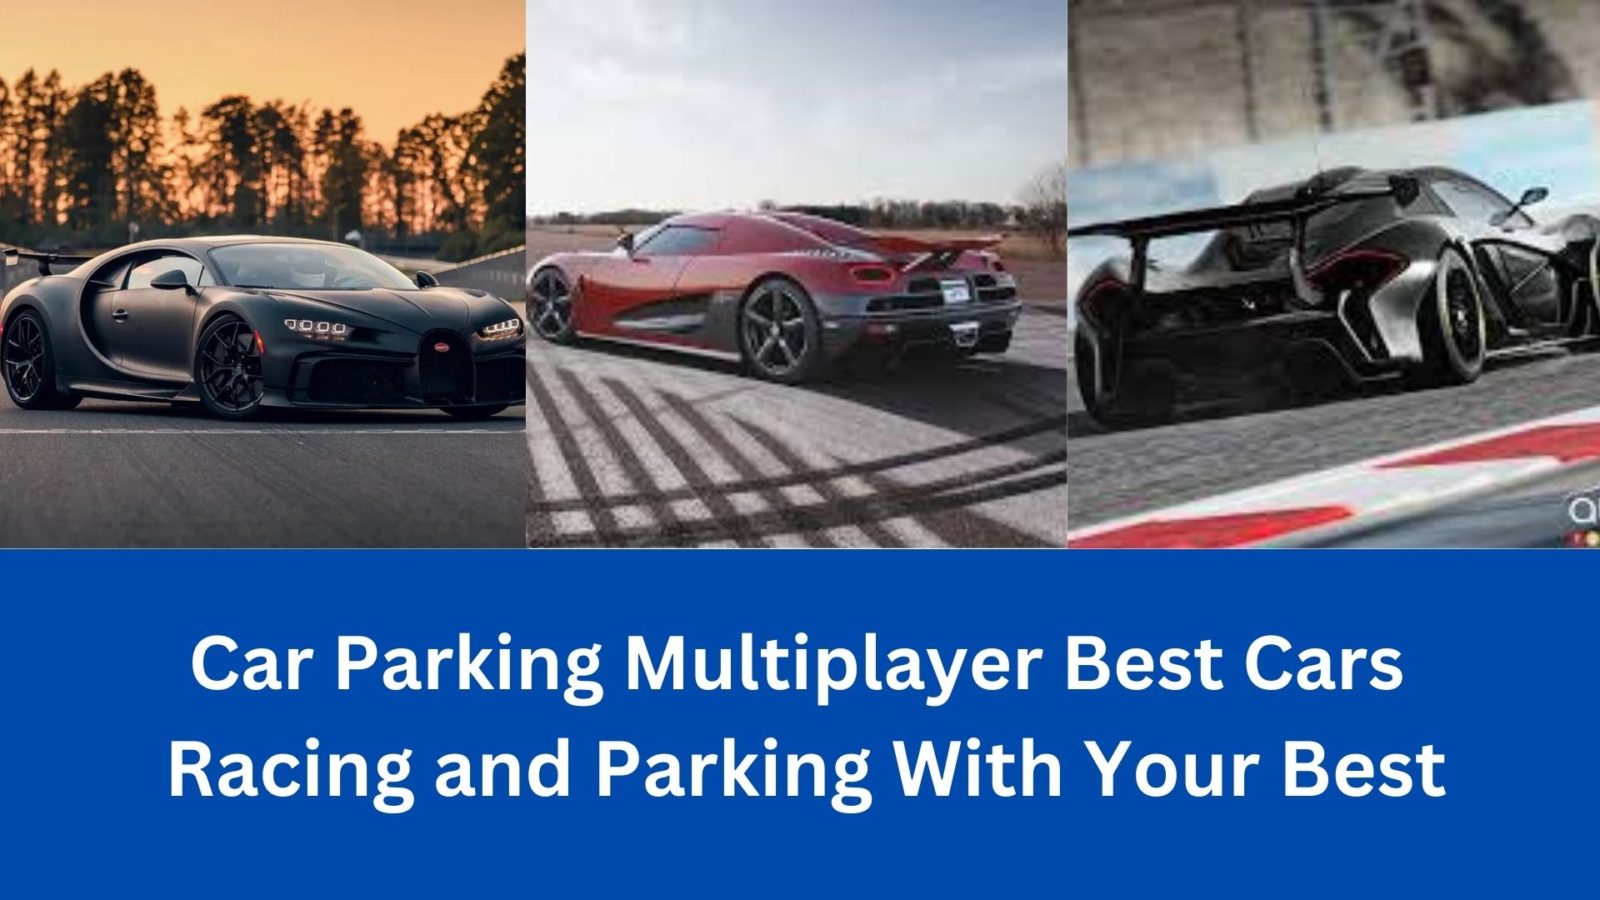 Car Parking Multiplayer Best Cars - Racing and Parking With Your Best Car